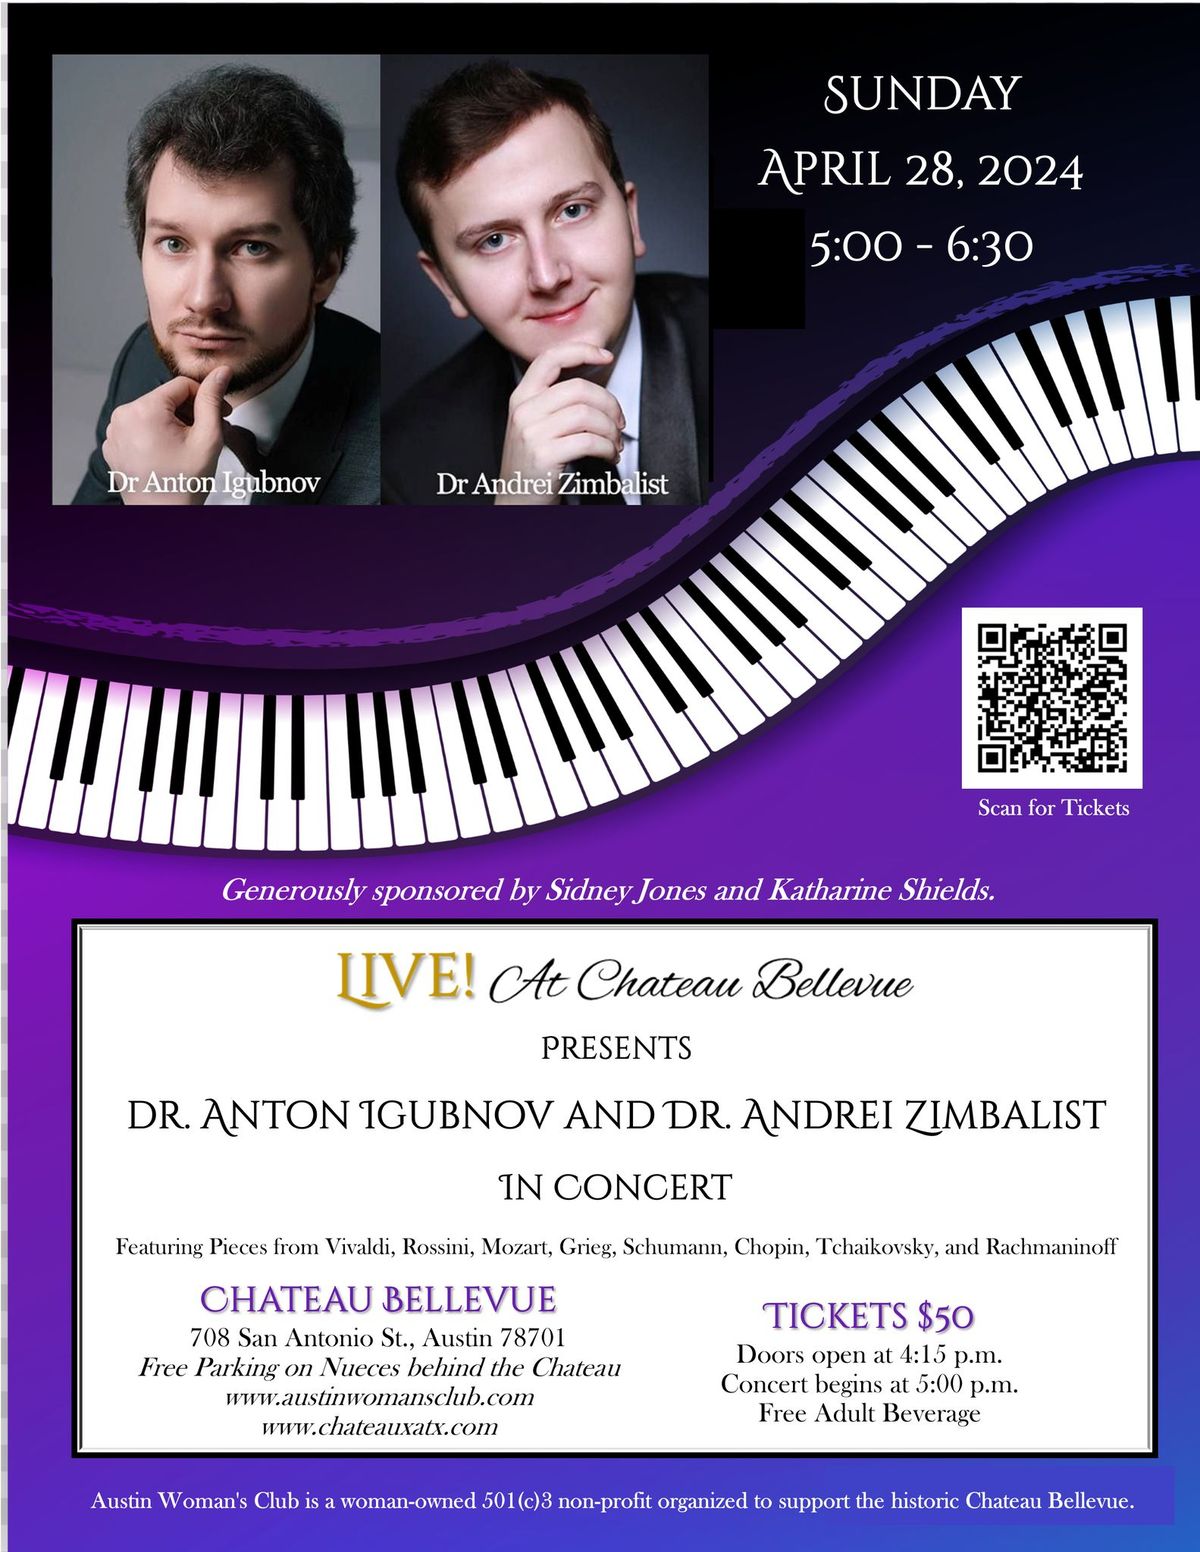 LIVE at Chateau Bellevue Presents Dr. Anton Igubnov and Dr. Andrei Zimbalist   In Concert